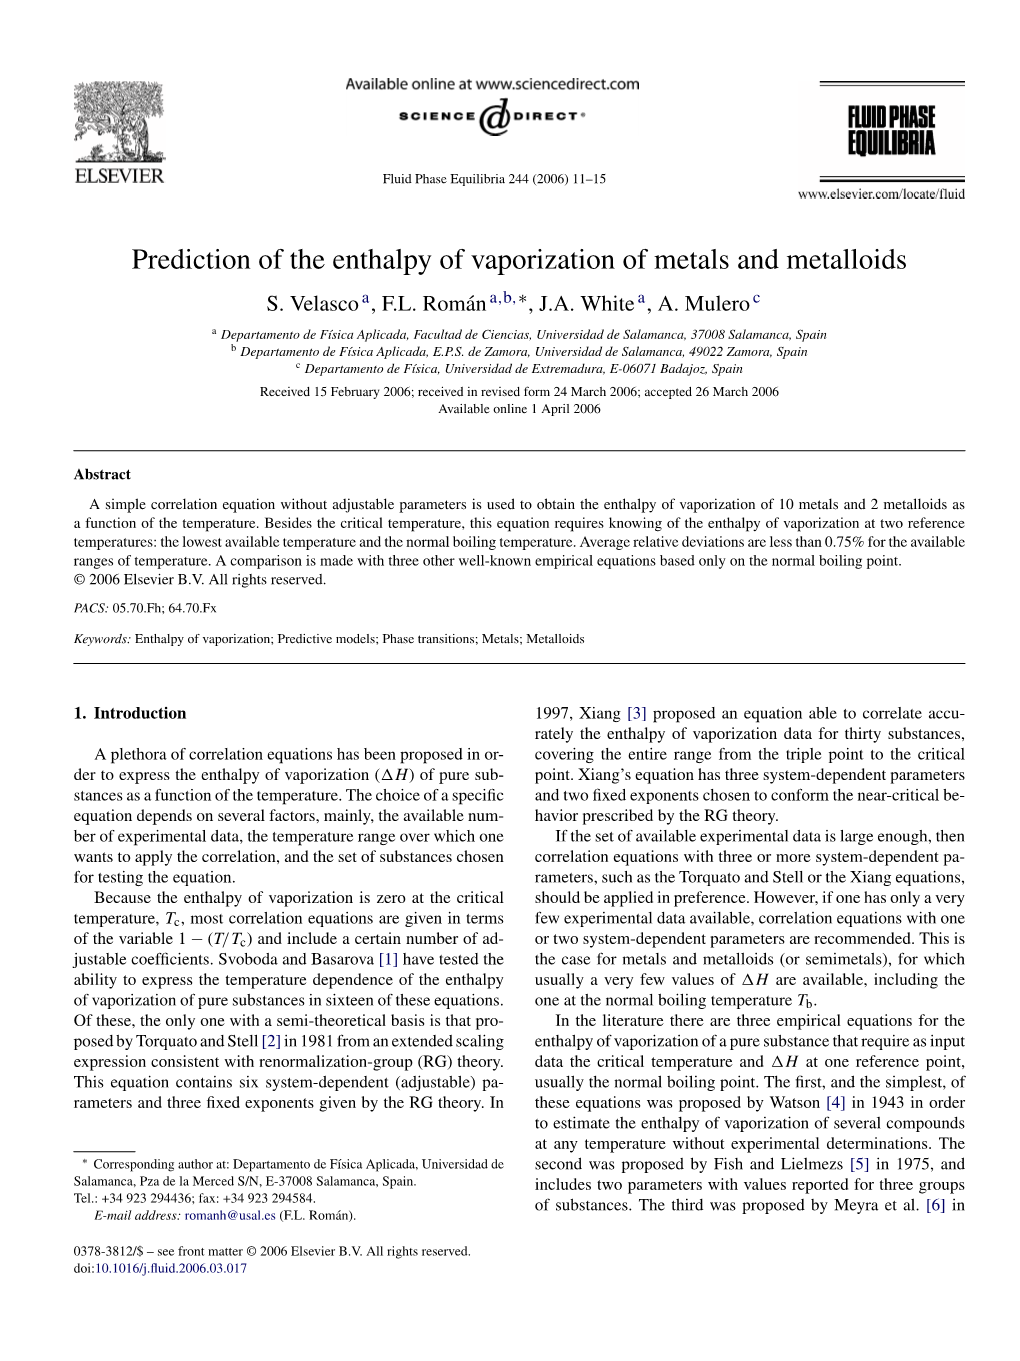 Prediction of the Enthalpy of Vaporization of Metals and Metalloids S